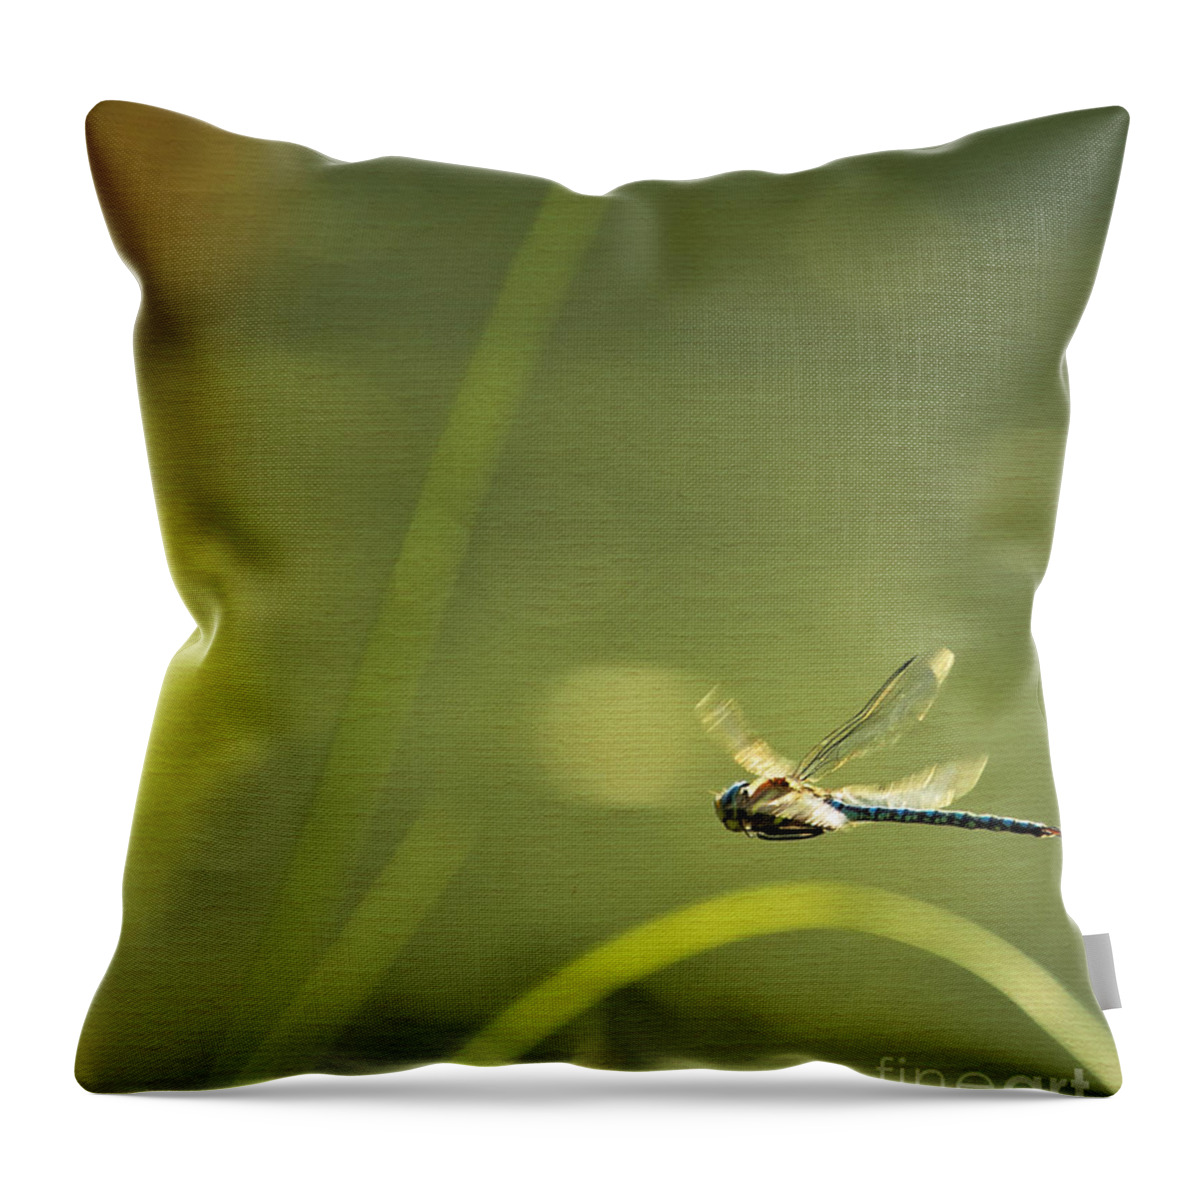 Blue Darner Throw Pillow featuring the photograph Blue Darner Dragonfly - Green Water and Light by Belinda Greb